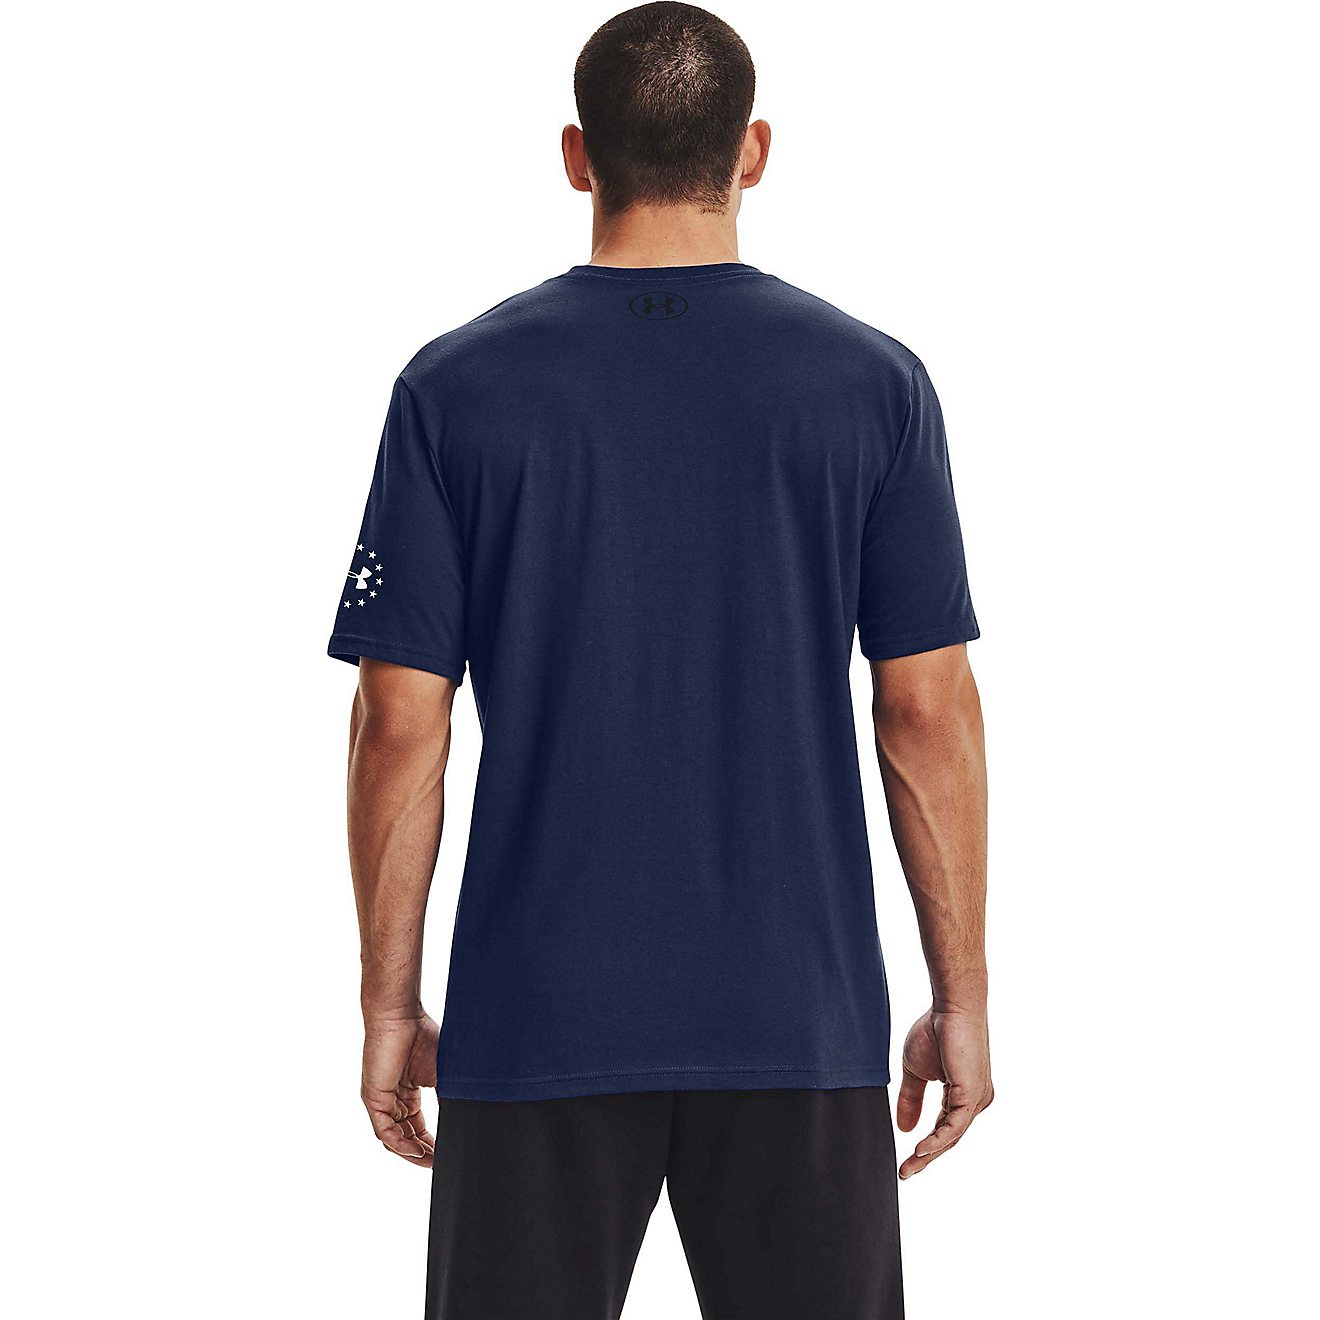 Under Armour Men's Freedom Flag Logo T-shirt                                                                                     - view number 2